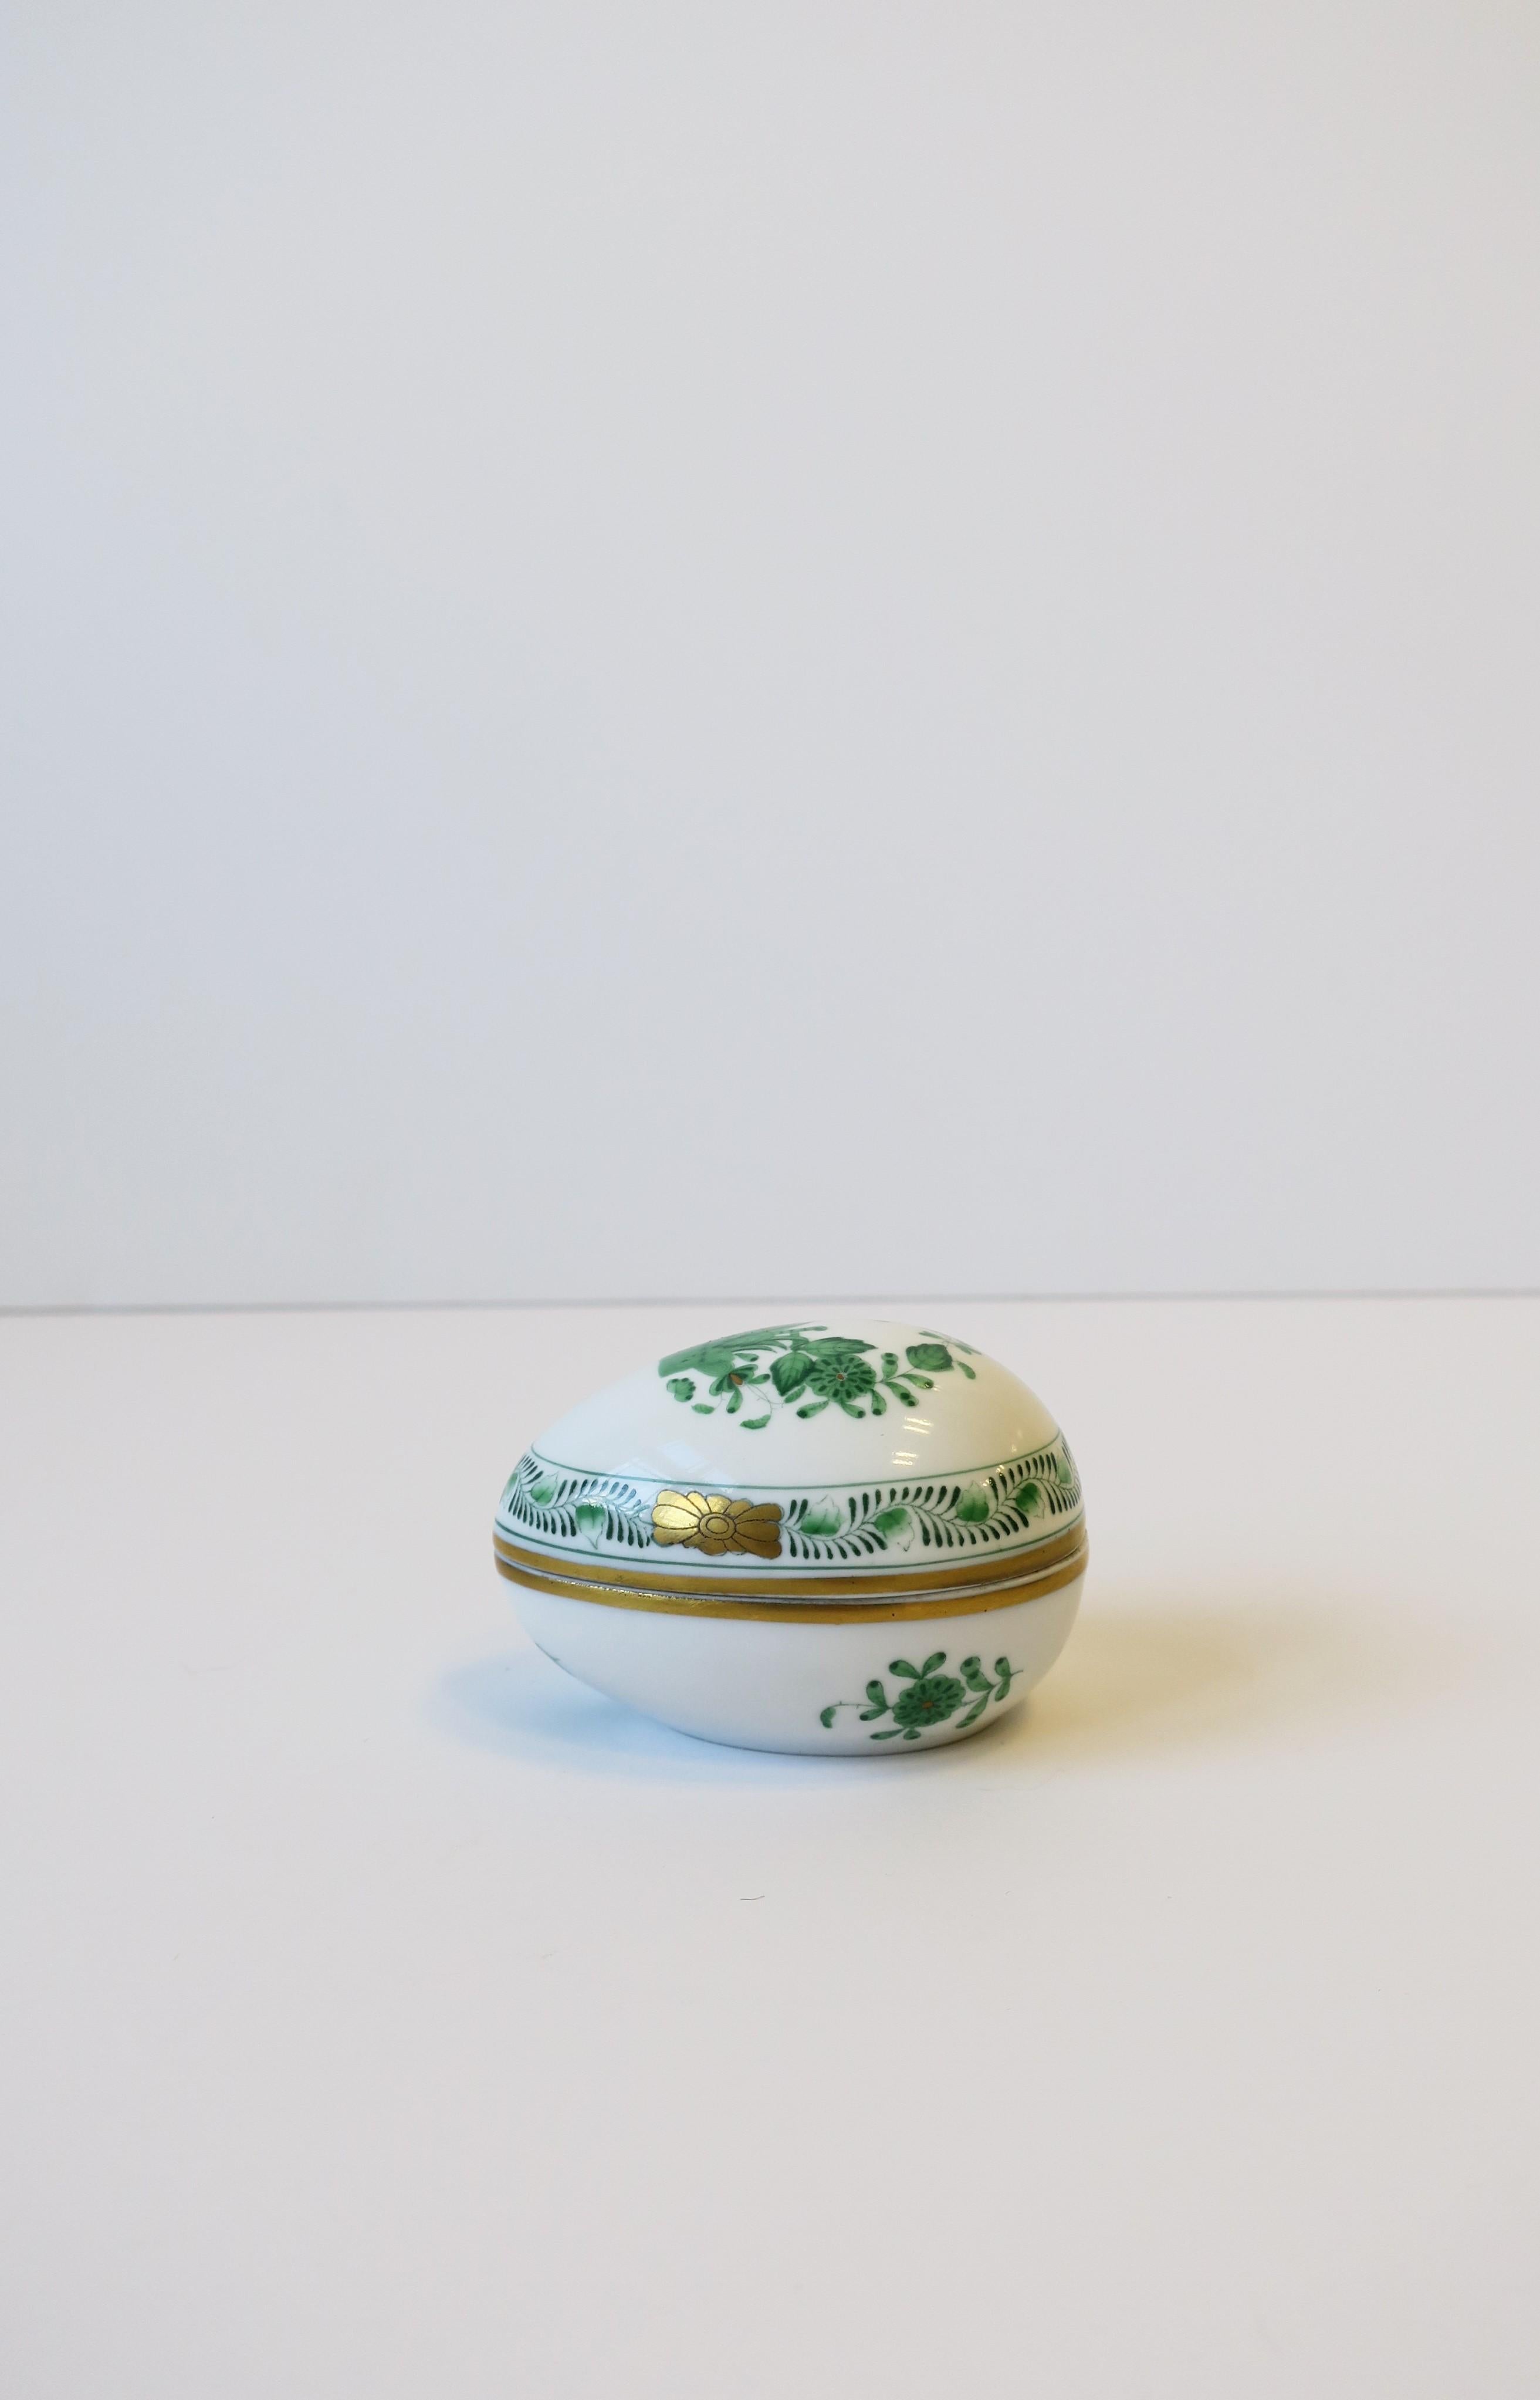 Hungarian Herend Porcelain Egg-Shaped Jewelry Box  For Sale